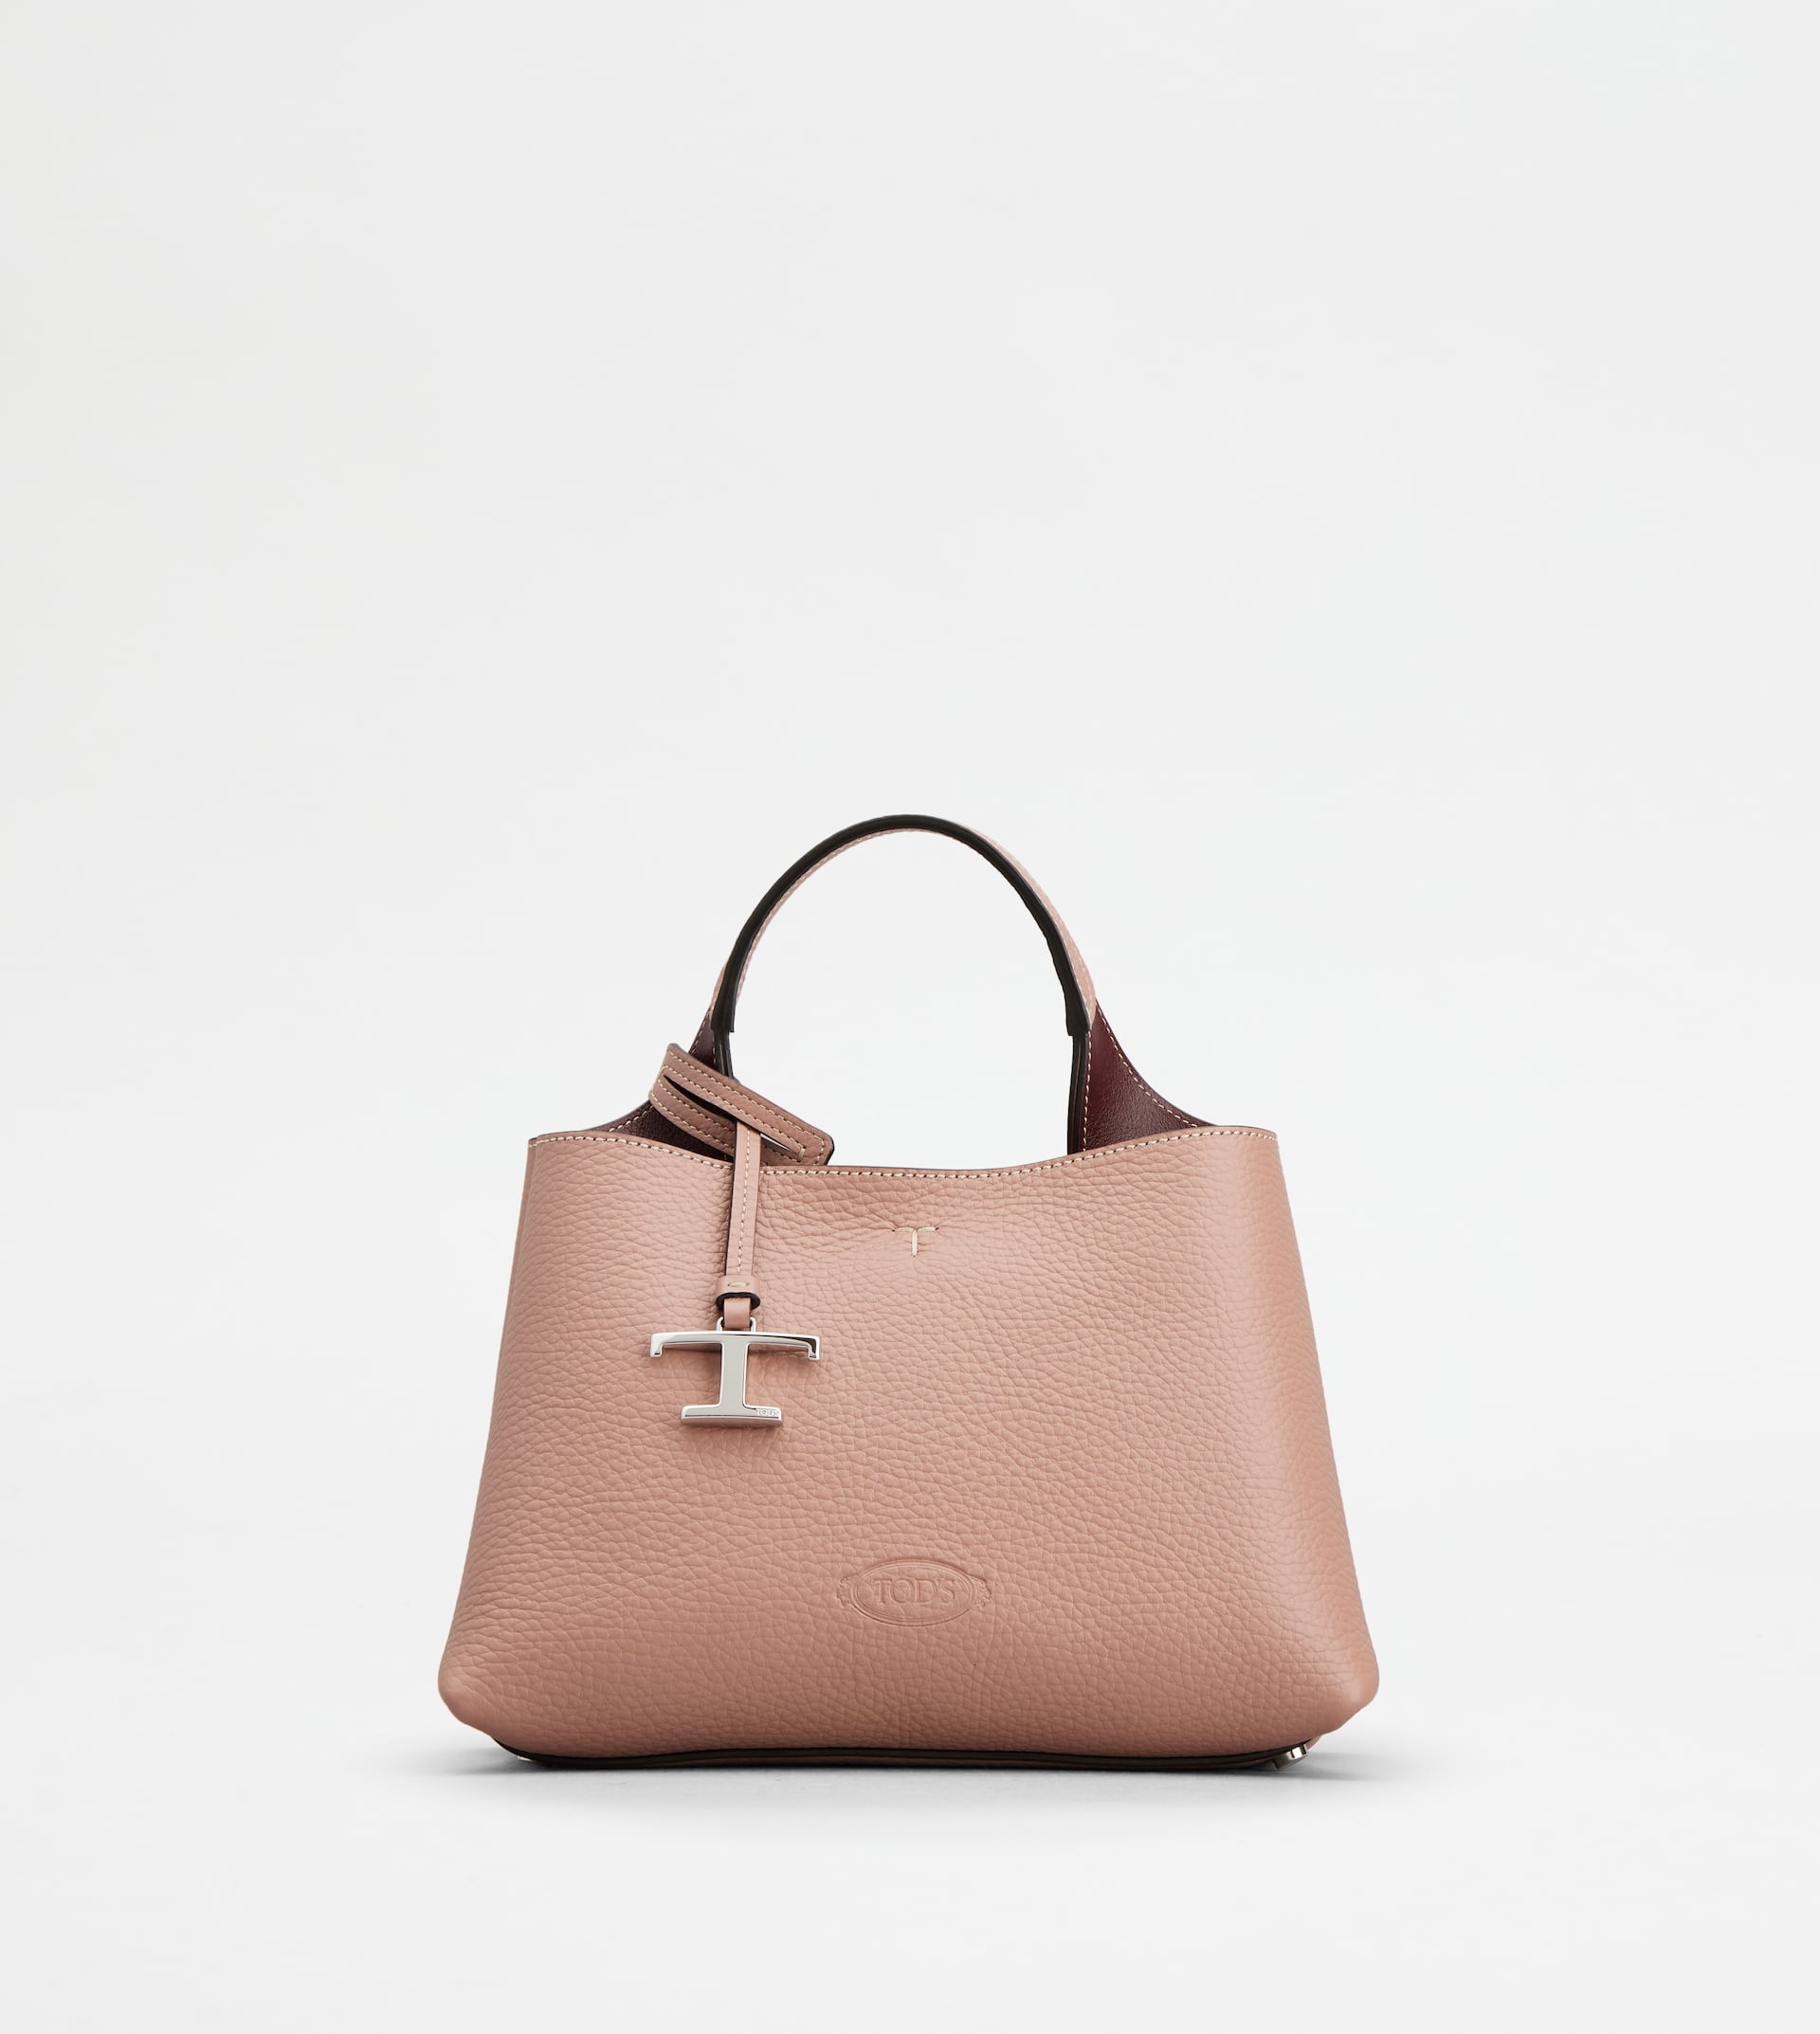 BAG IN LEATHER MICRO - BURGUNDY, PINK - 1